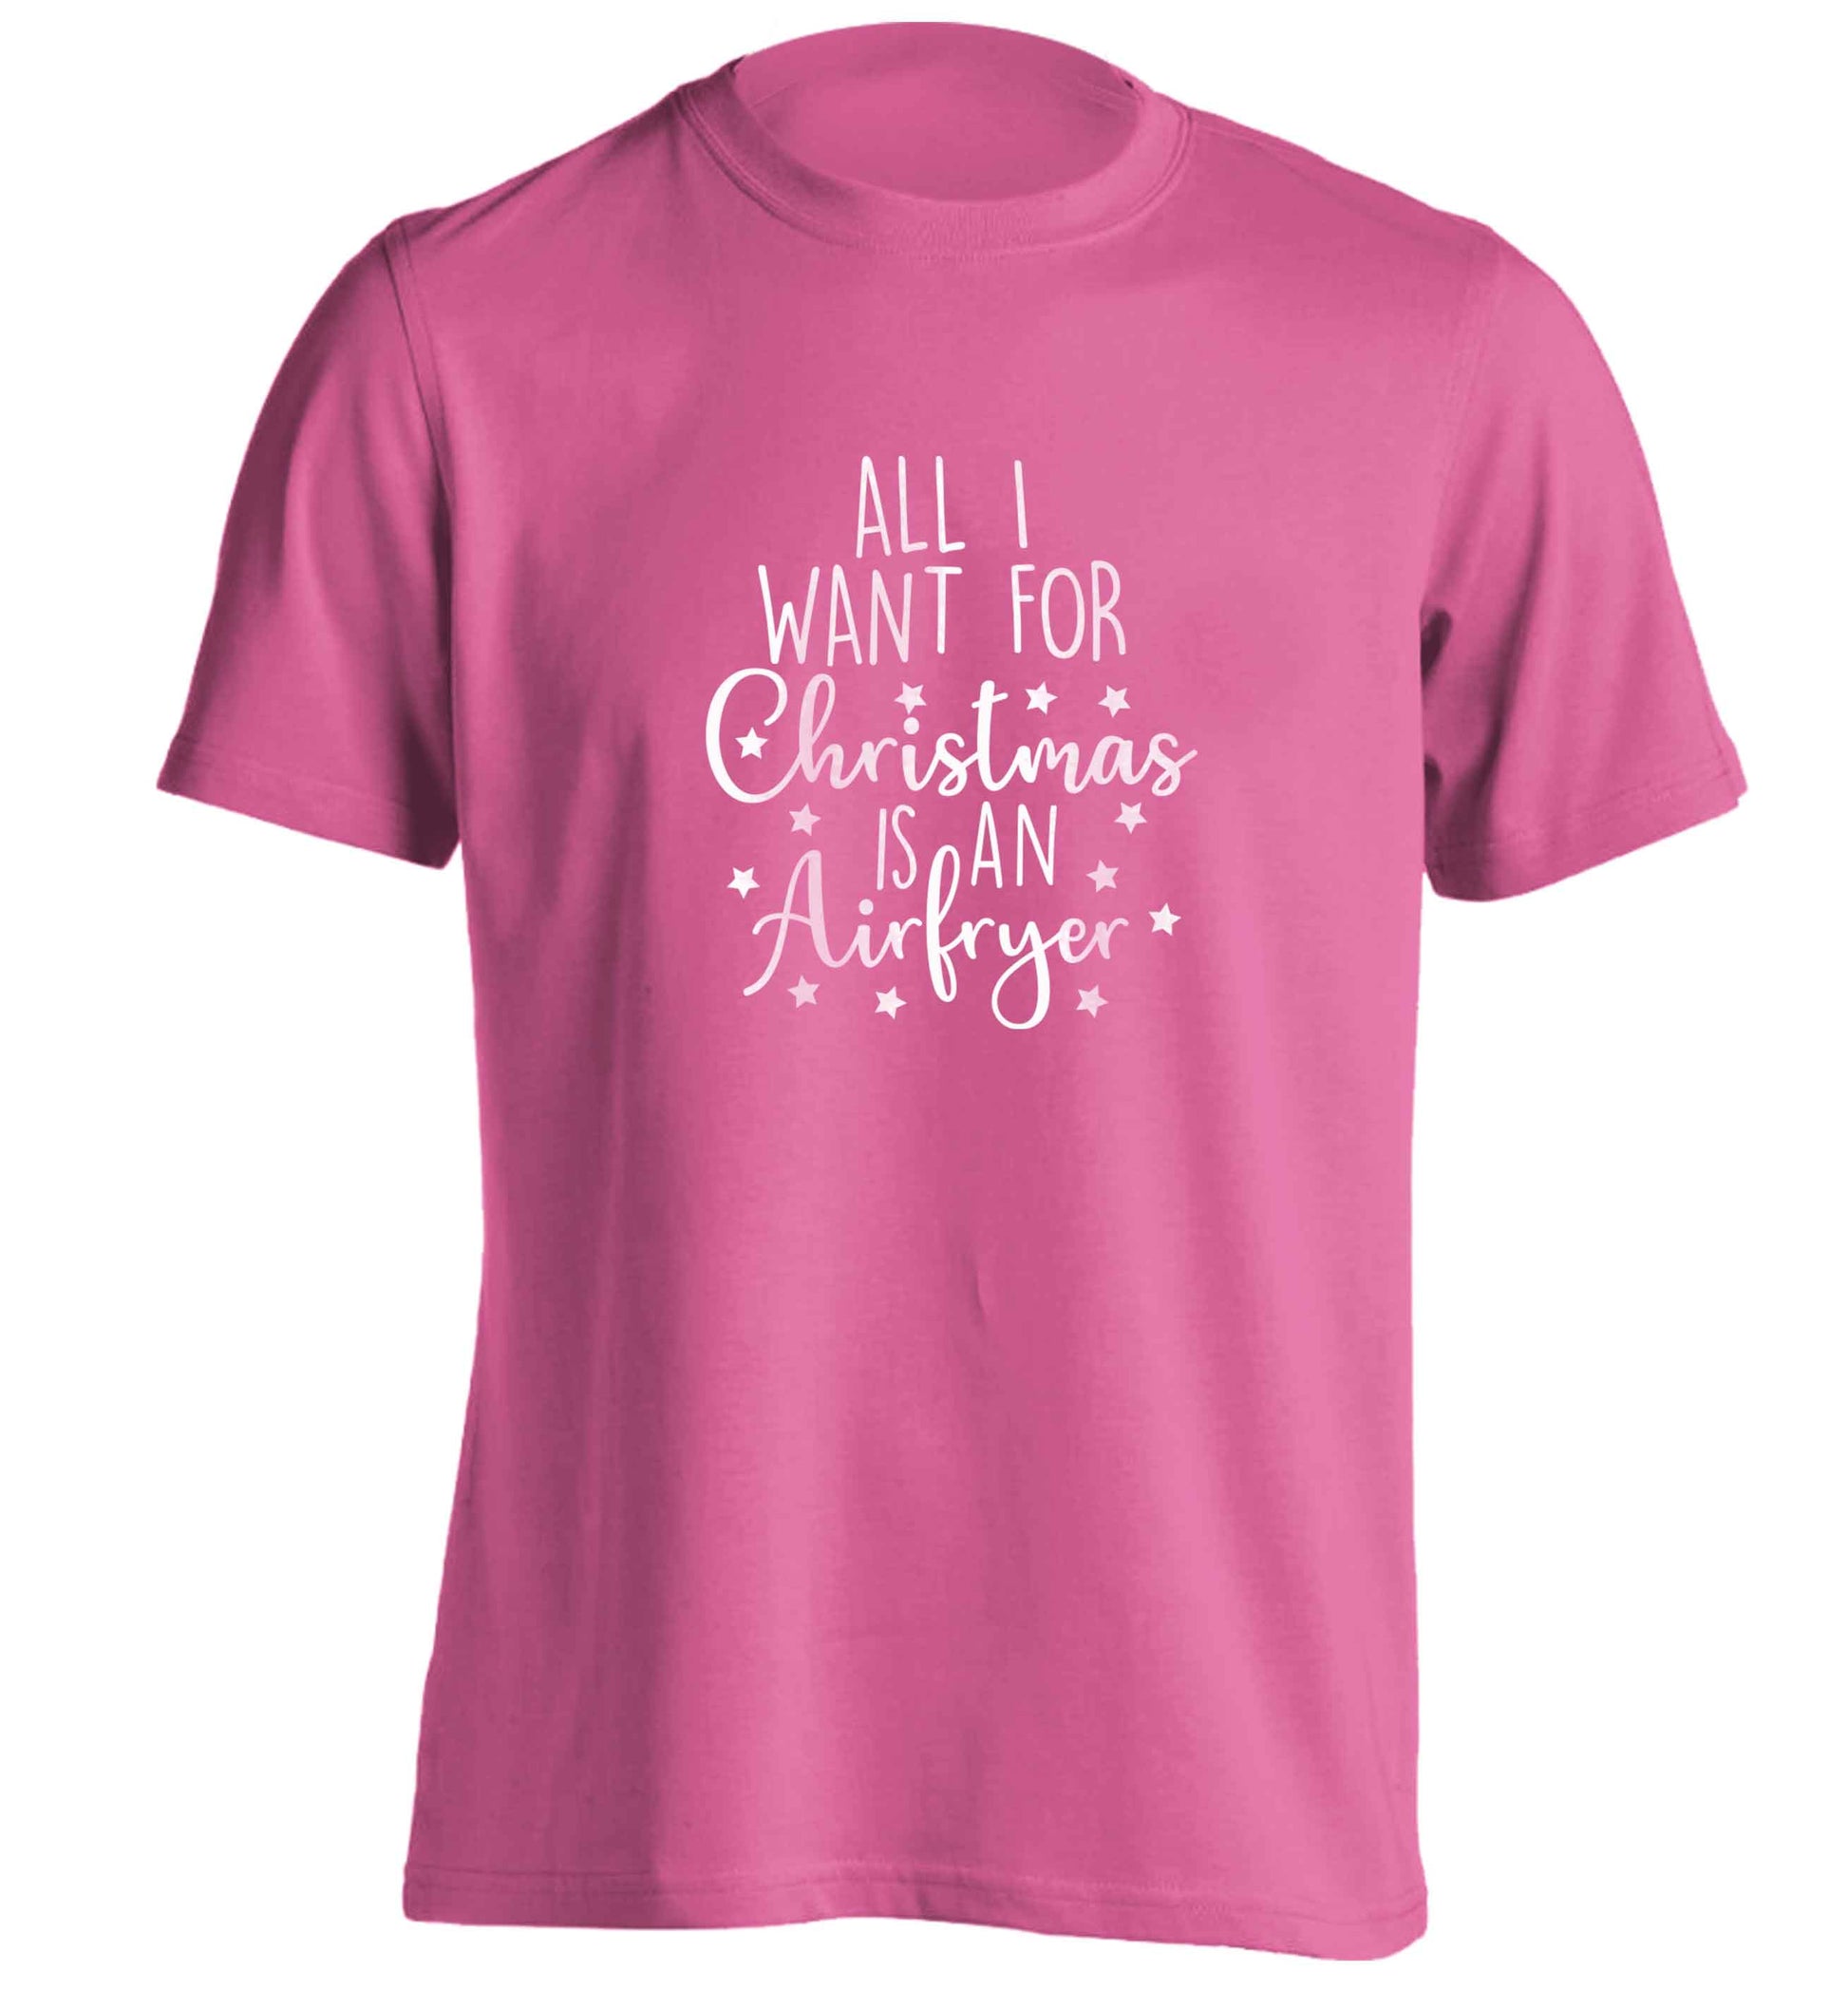 All I want for Christmas is an airfryeradults unisex pink Tshirt 2XL